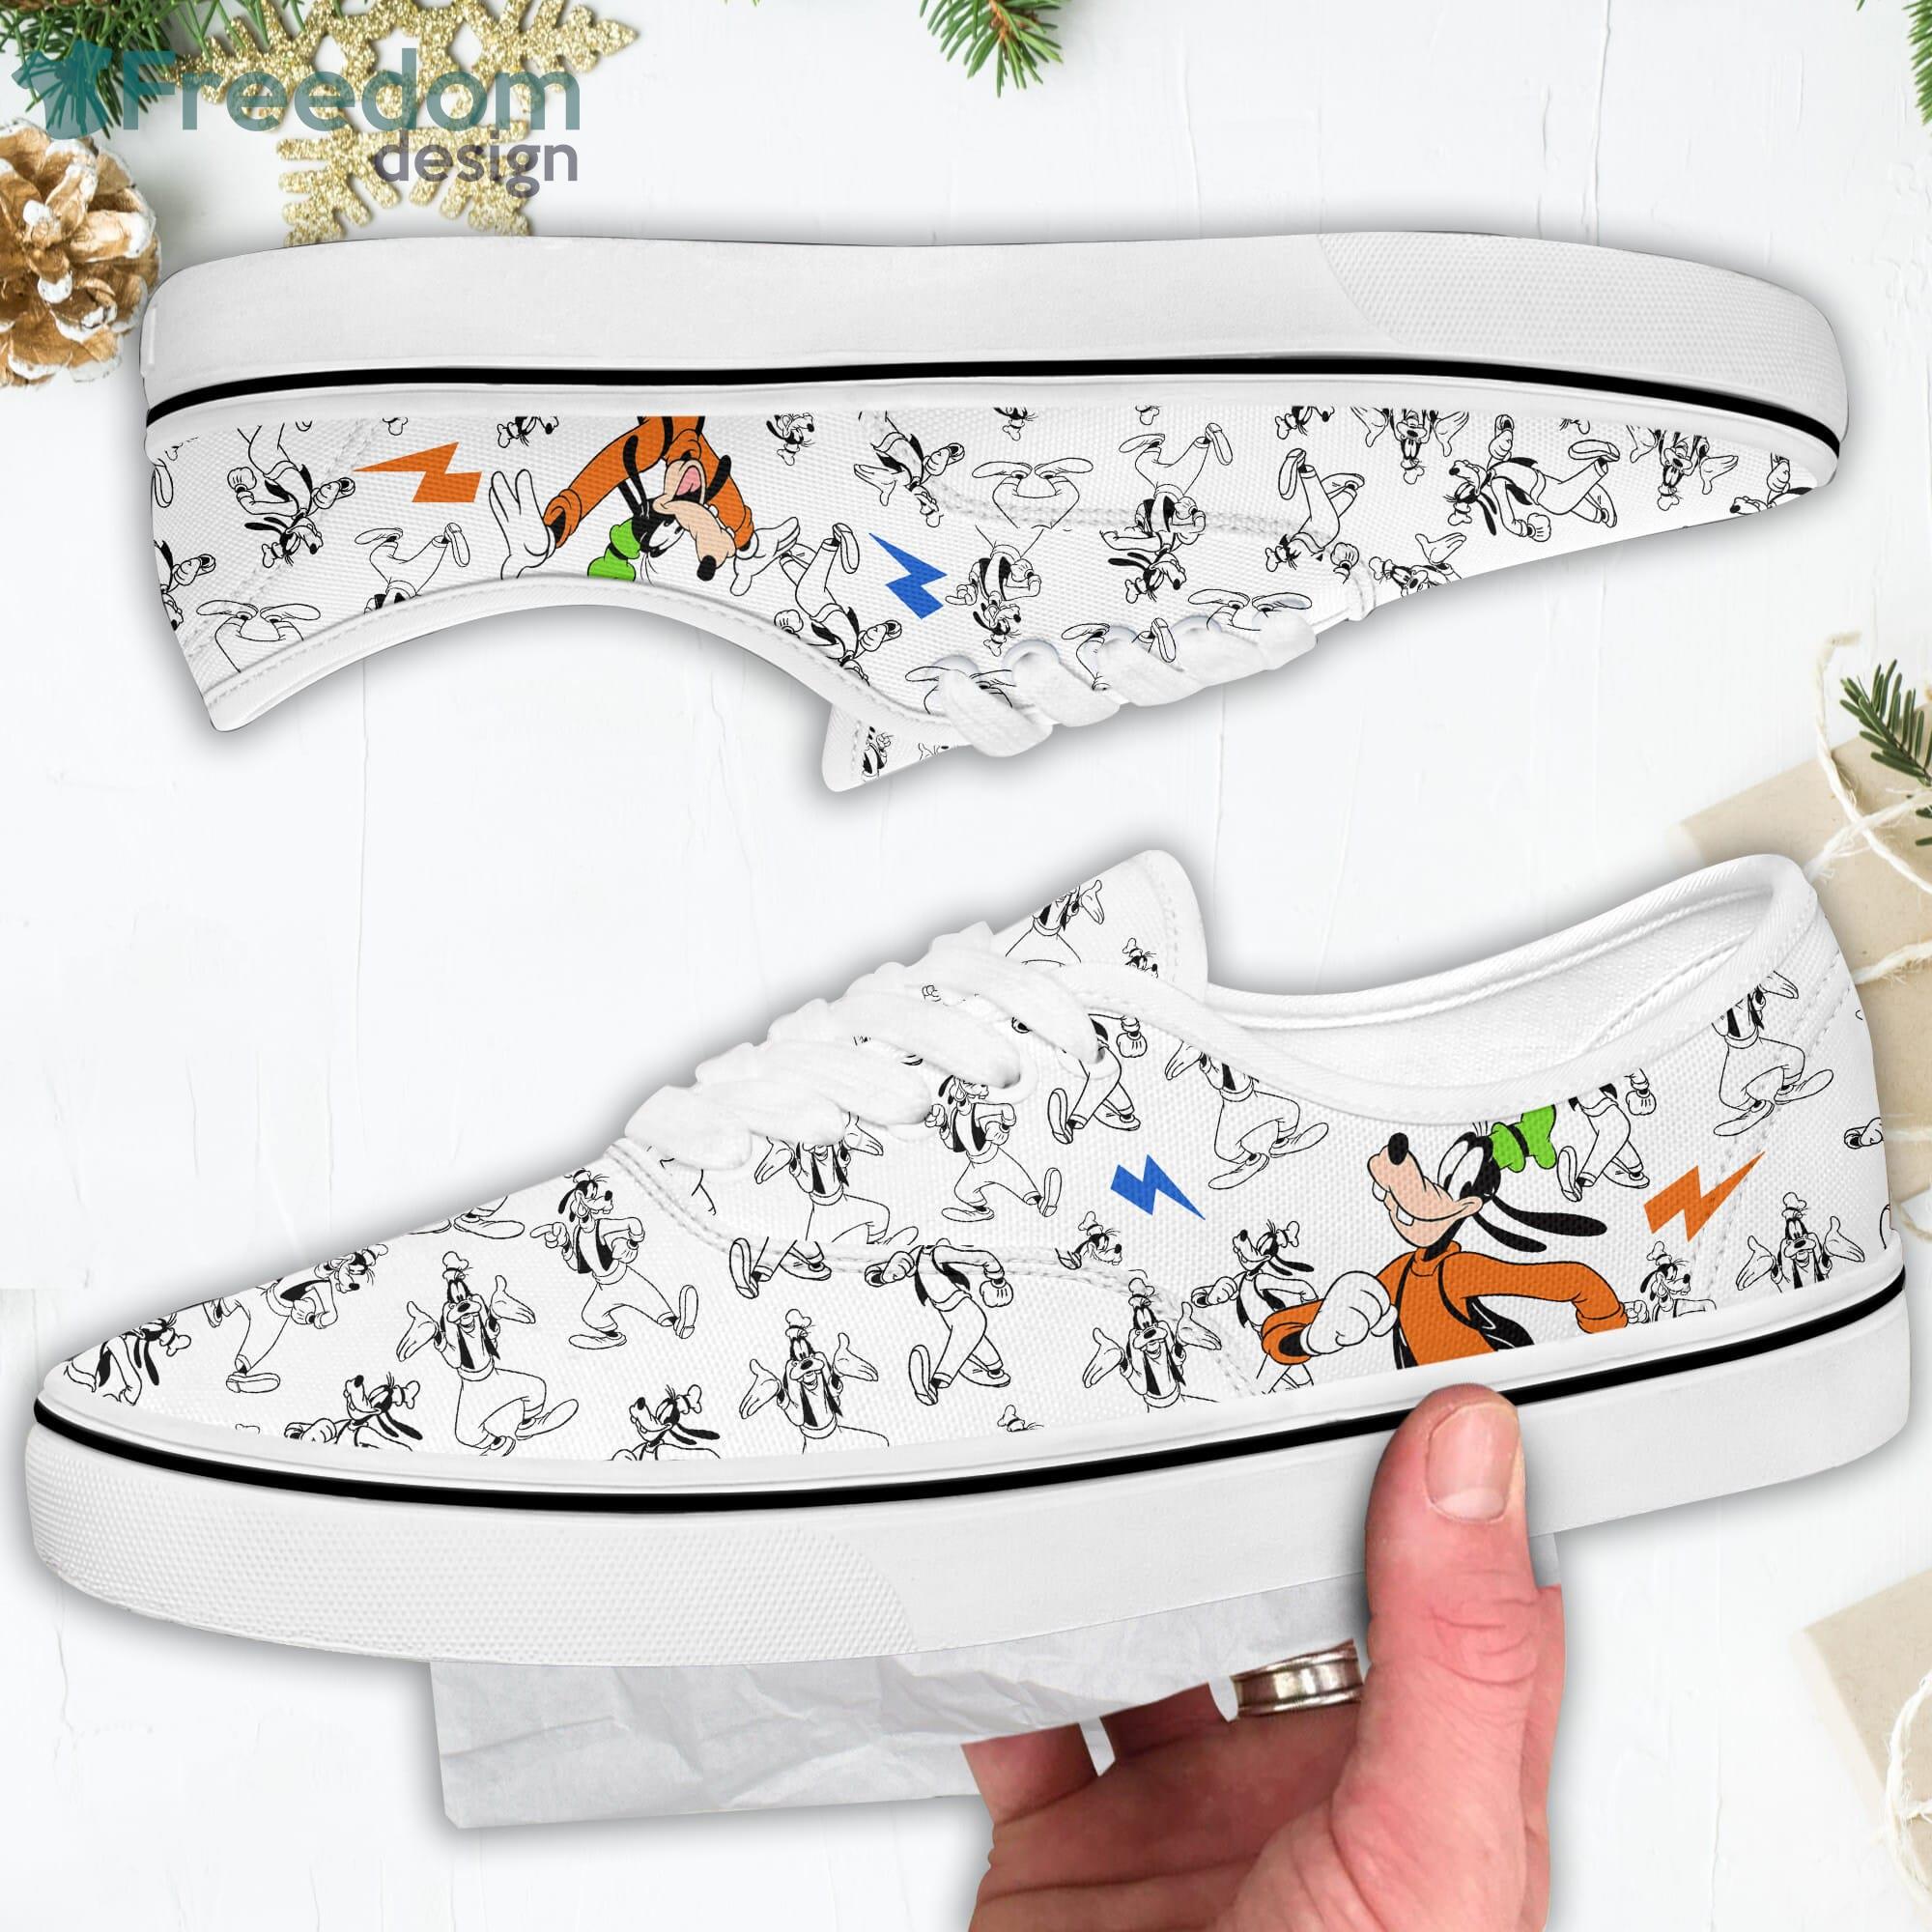 Goofy White Patterns Cartoon Cute Low Top Slip On Lace Up Canvas Vans Shoes - Freedomdesign